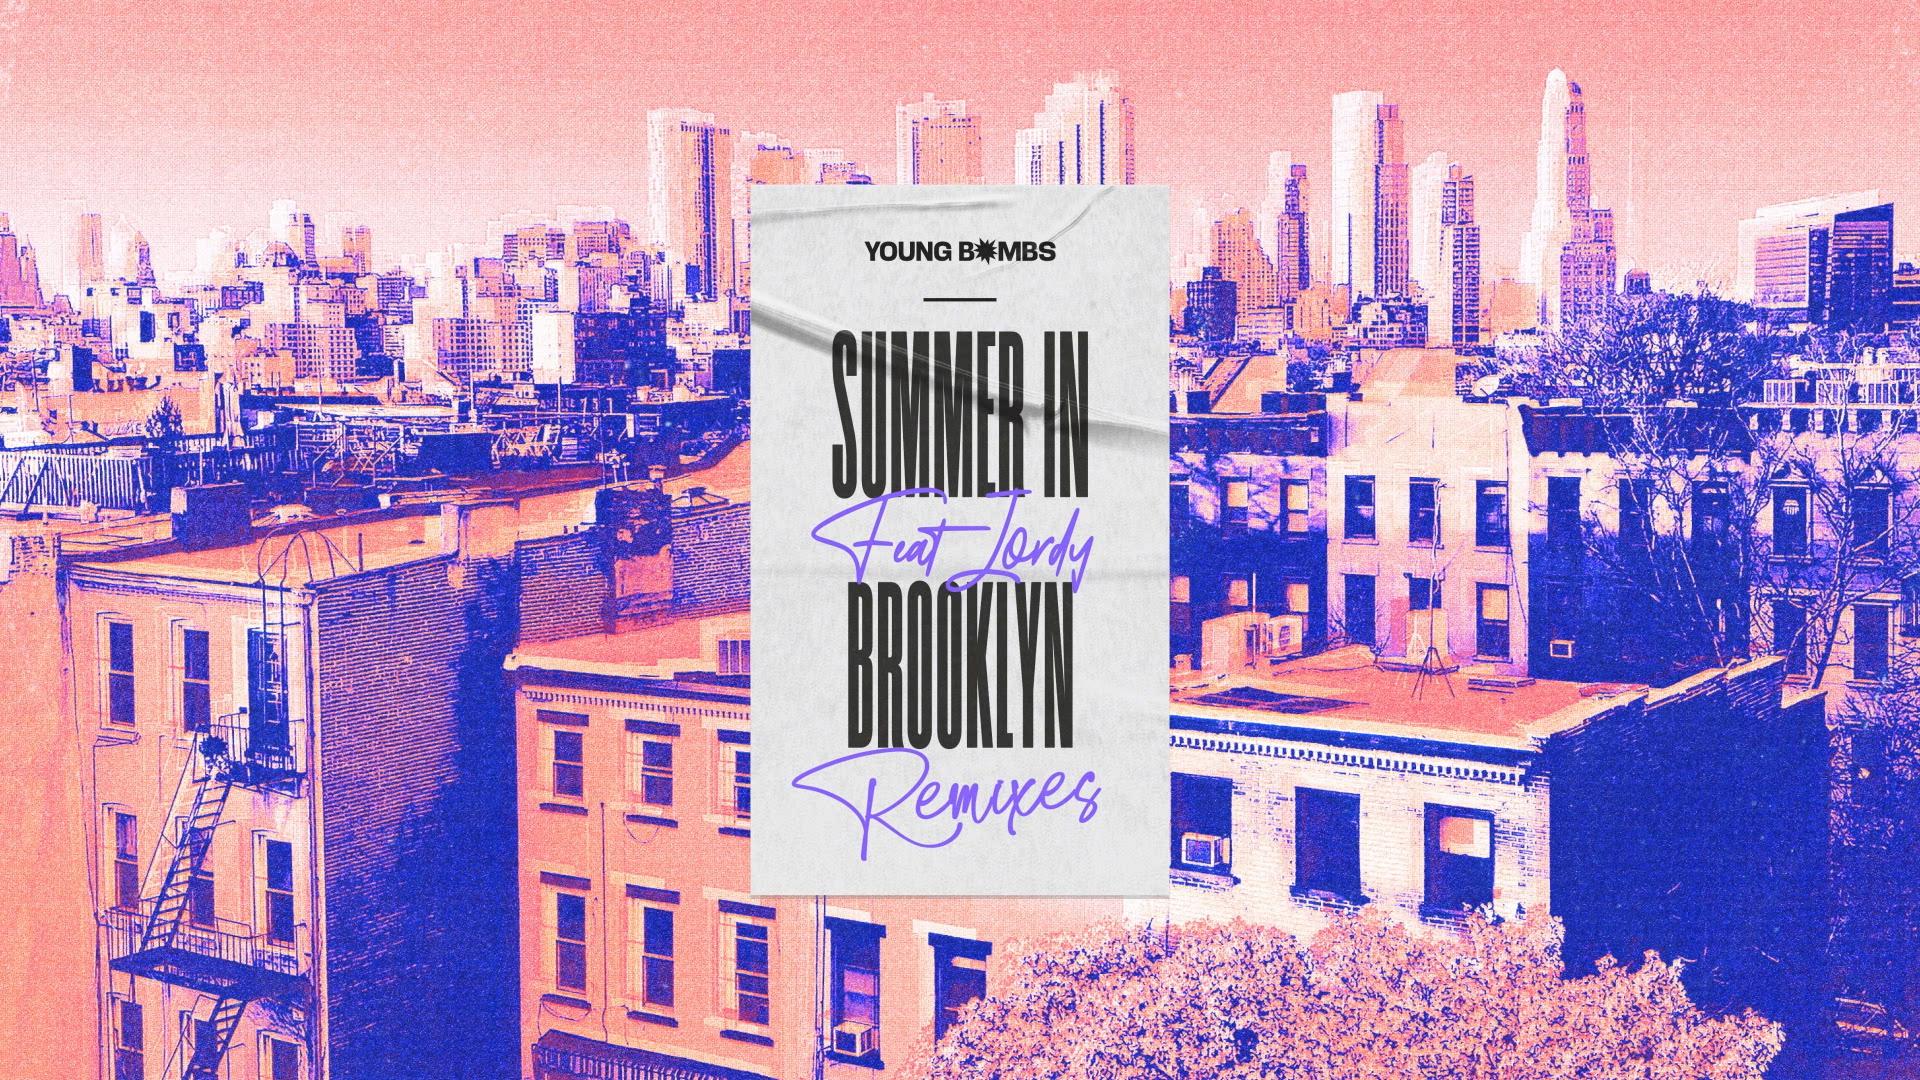 YOUNG BOMBS - Summer in Brooklyn (clavette Remix) (Visualizer)